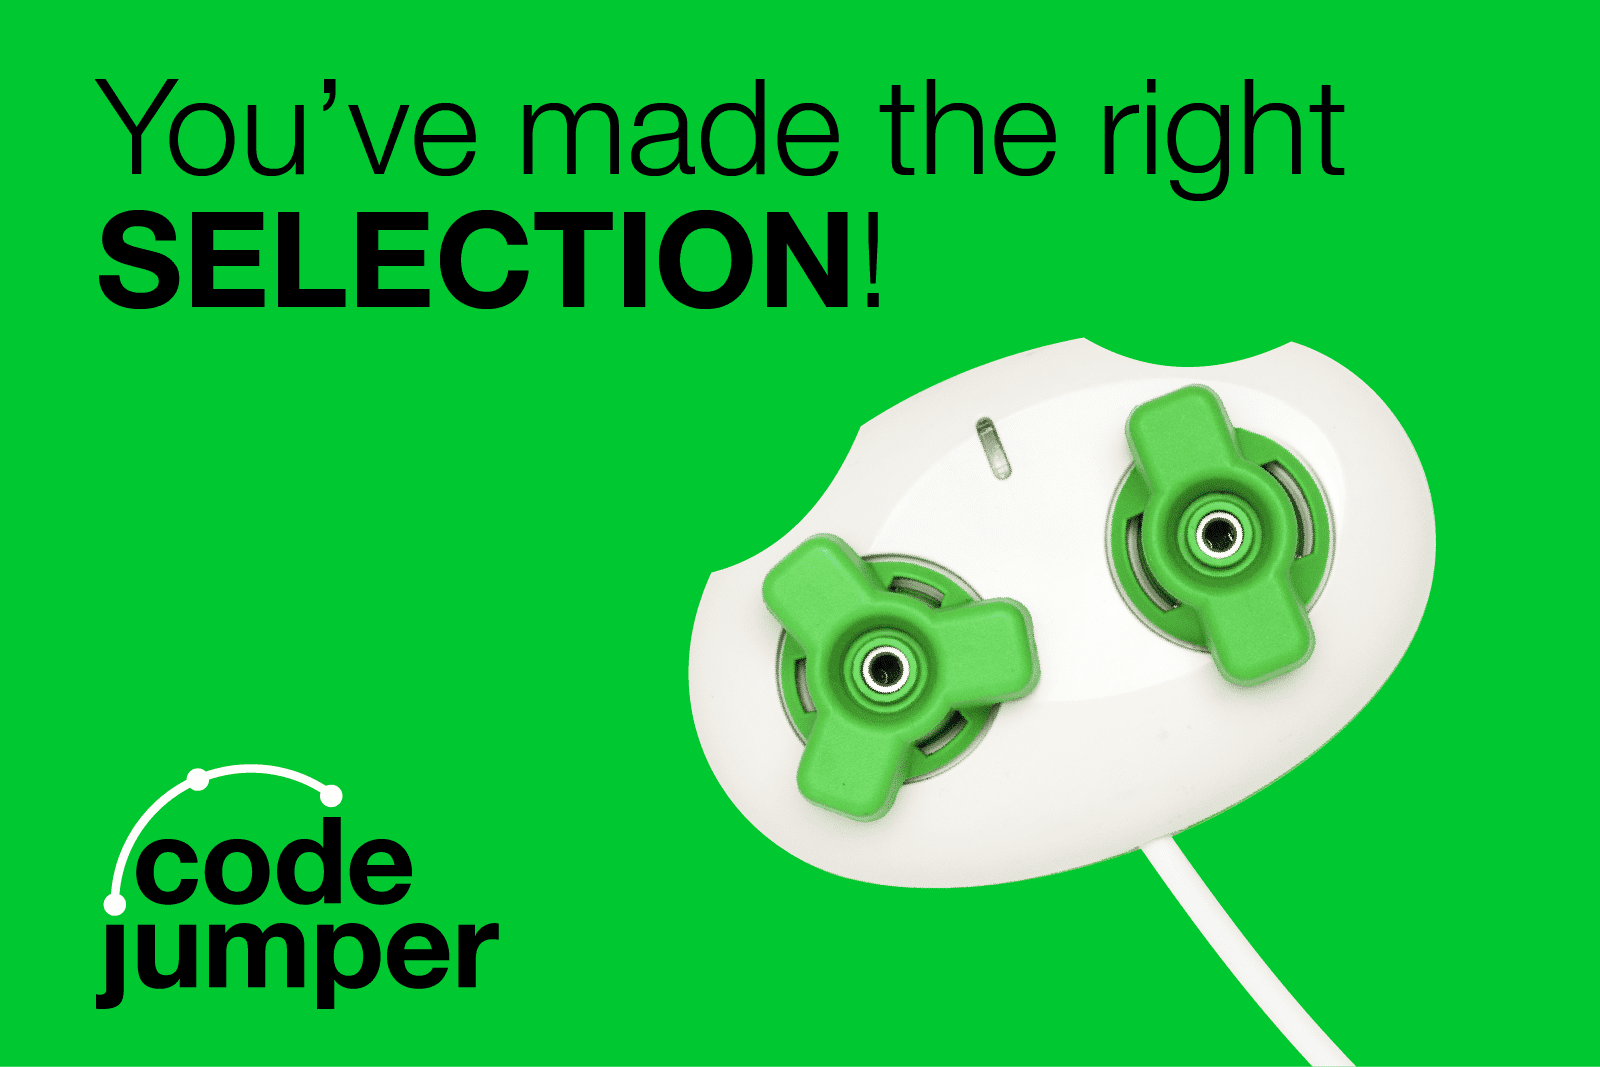 a white code jumper pod with two green dials on a green background. Text reads "You've made the right SELECTION!" Code Jumper logo